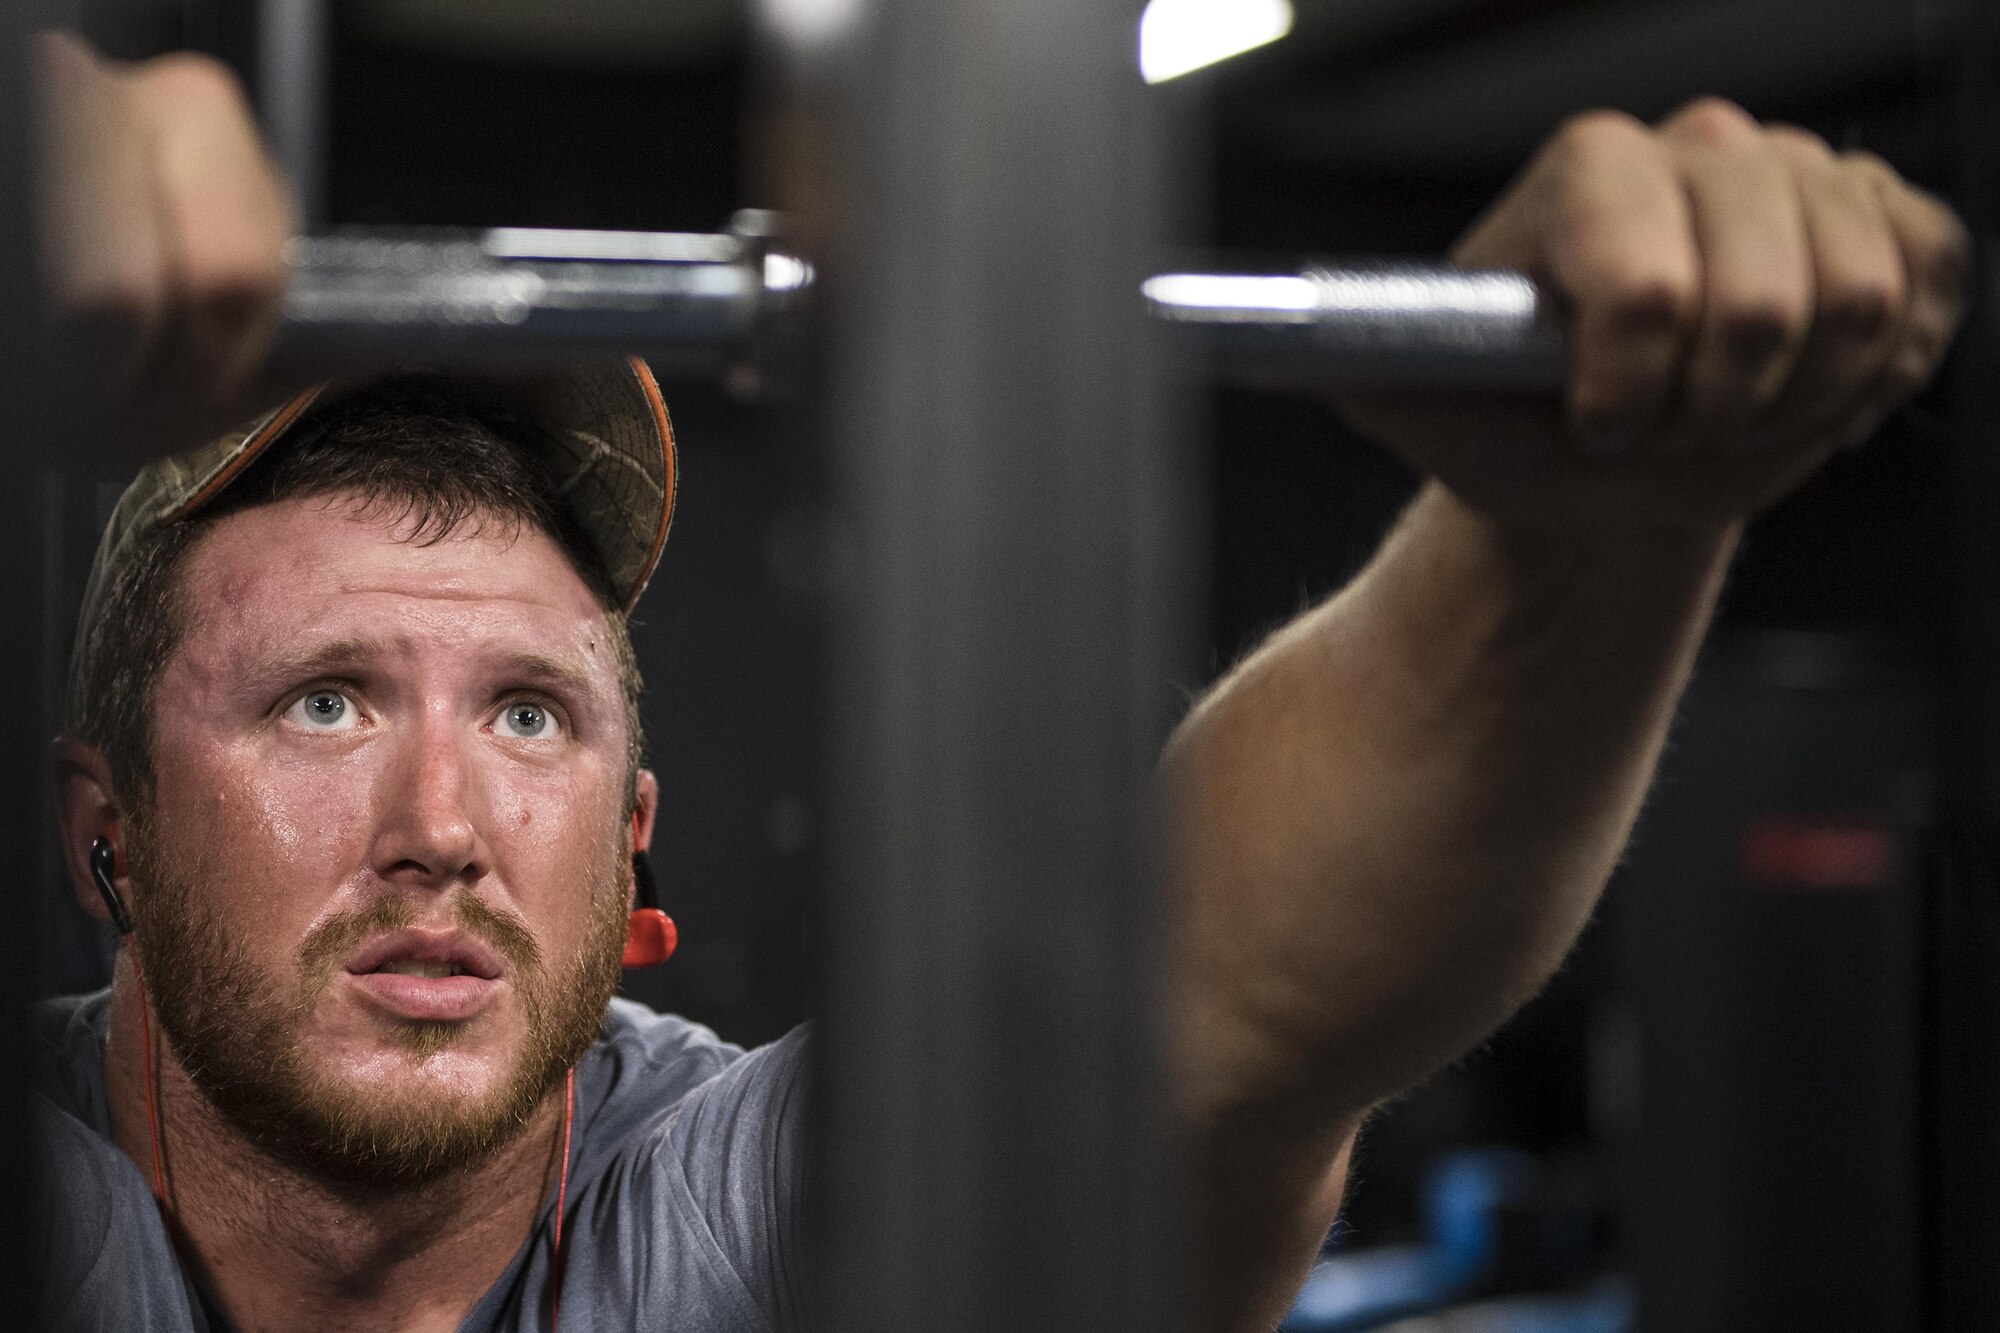 Staff Sgt. Nicholas Worley, 23d Civil Engineer Squadron electrical systems craftsman, pauses during a workout, April 18, 2017, in Valdosta, Ga. In January 2012 Worley was diagnosed with Chronic Myelogenous Leukemia, an uncommon form of blood-cell cancer that starts in the blood-forming bone marrow cells. He’s currently in remission and goes to the cancer center every three months to ensure his treatment is still working. “The gym plays a major part in my remission status because I can see my body progressing and getting stronger and I know I’m not feeling sick,” said Worley. (U.S. Air Force Photo by Senior Airman Janiqua P. Robinson)